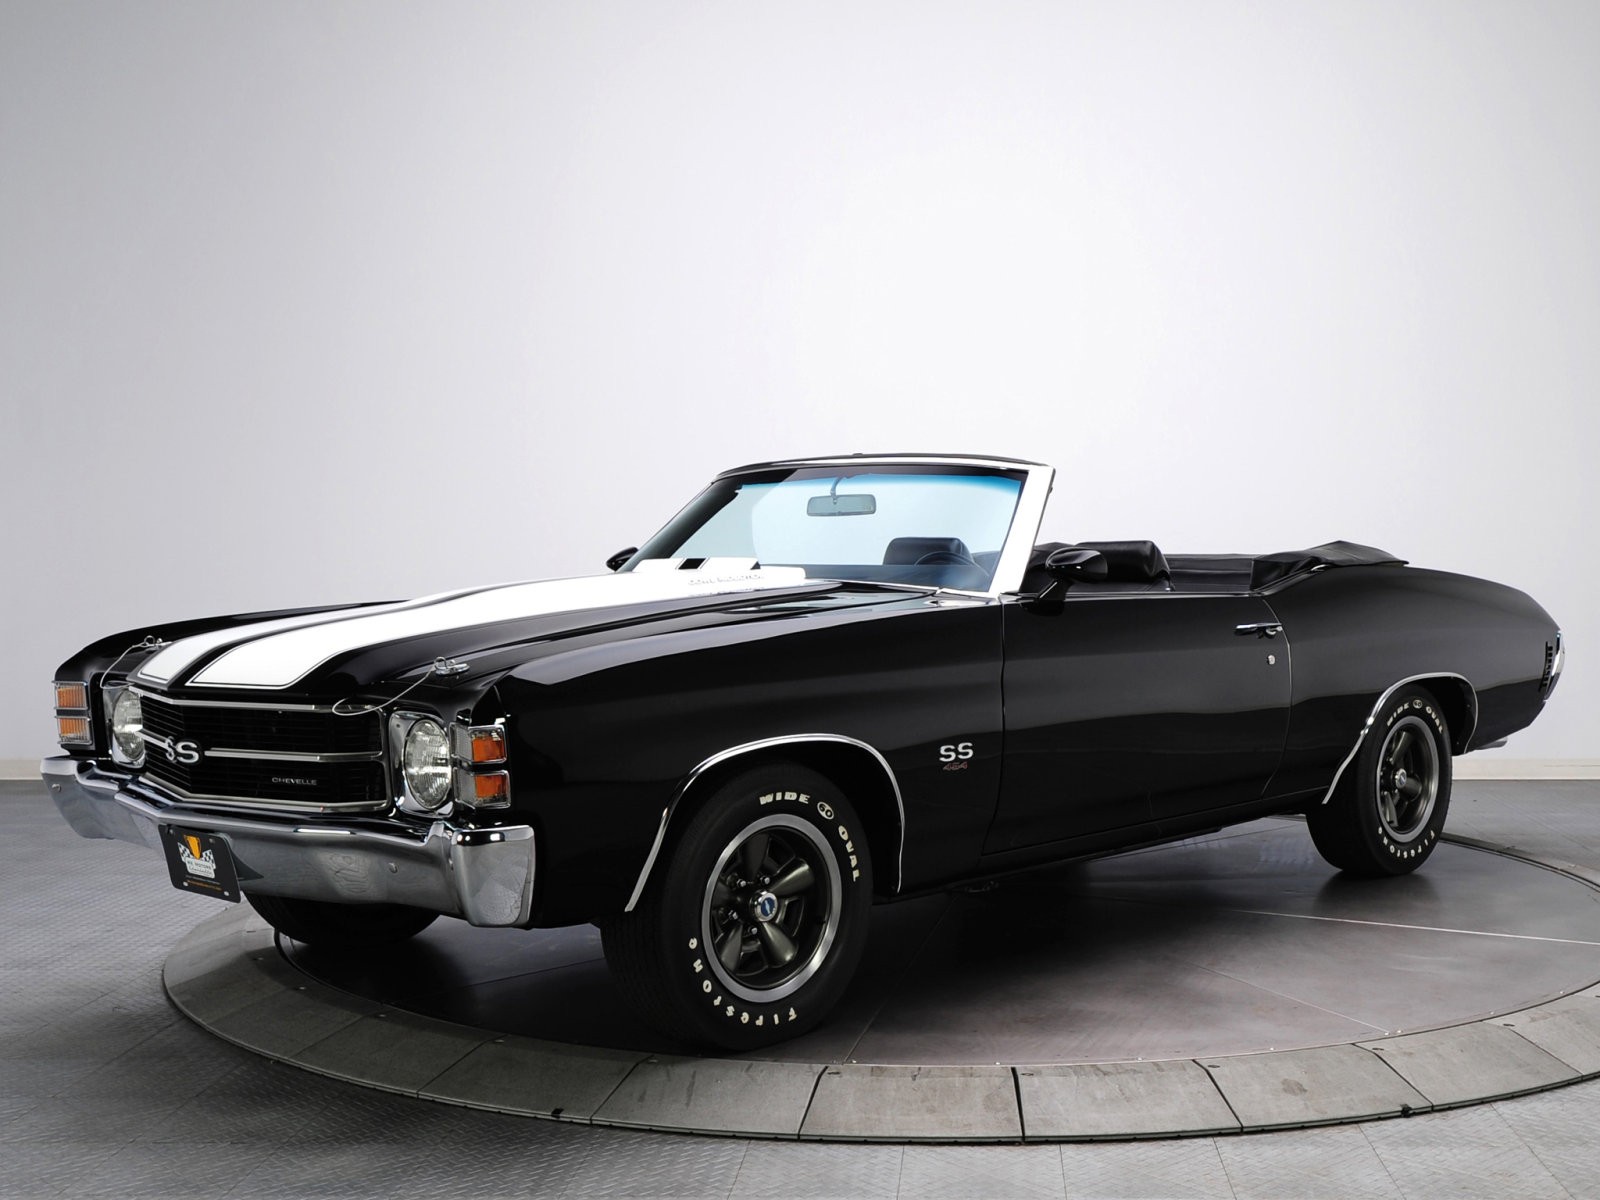 General 1600x1200 Chevrolet Chevelle car Chevrolet vehicle black cars racing stripes convertible muscle cars American cars